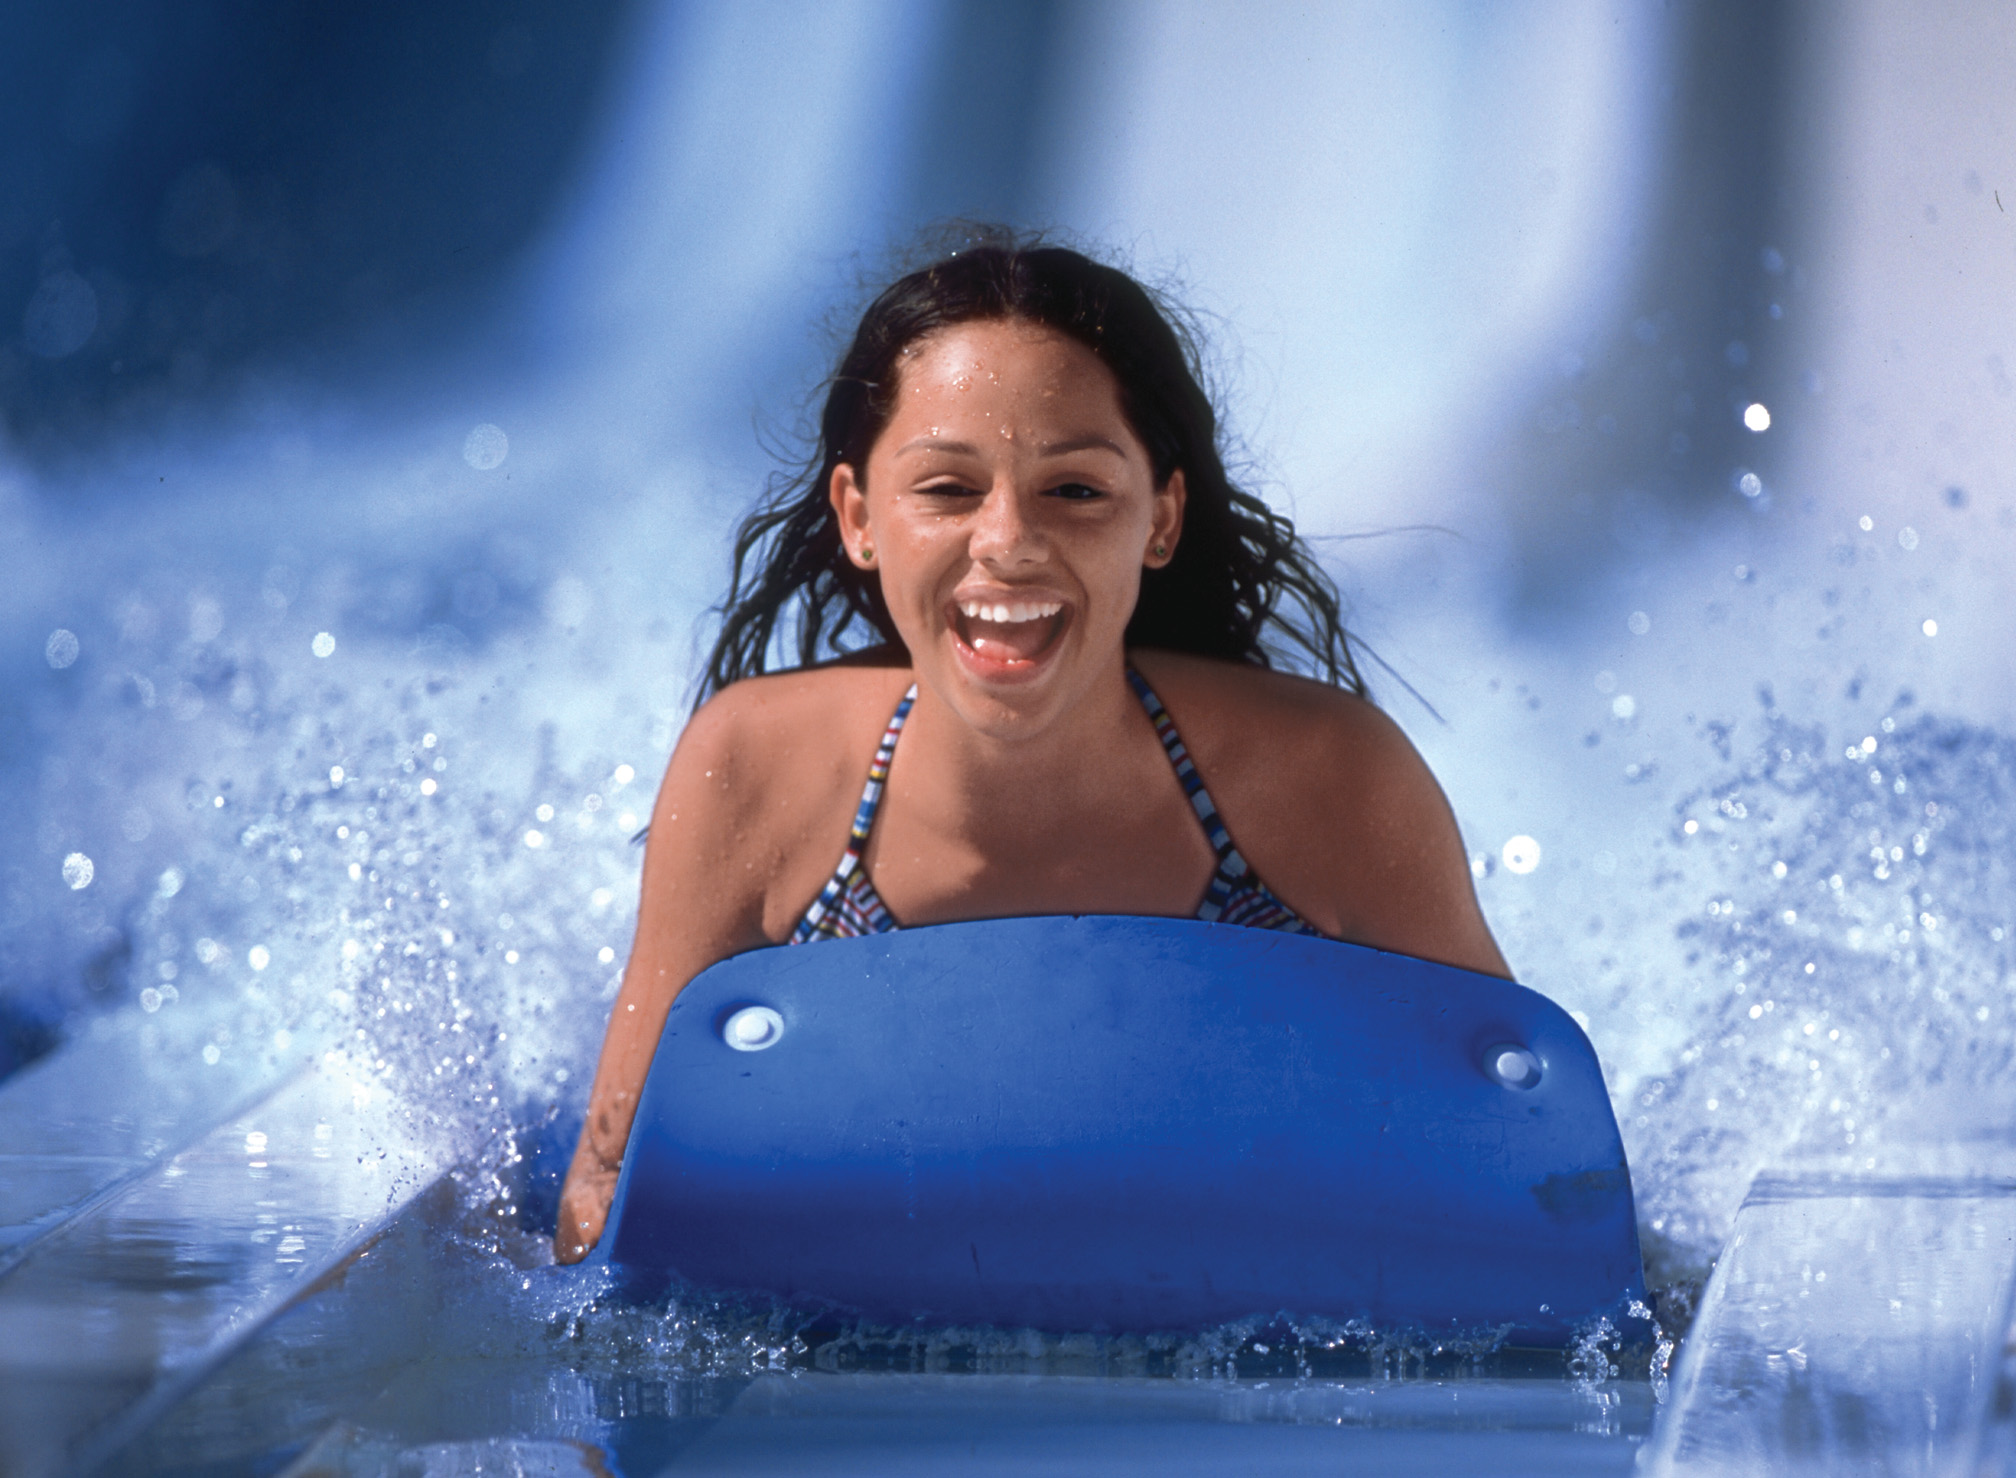 Dorney Deals Travel Packages Give Families More Time to Tackle the ...